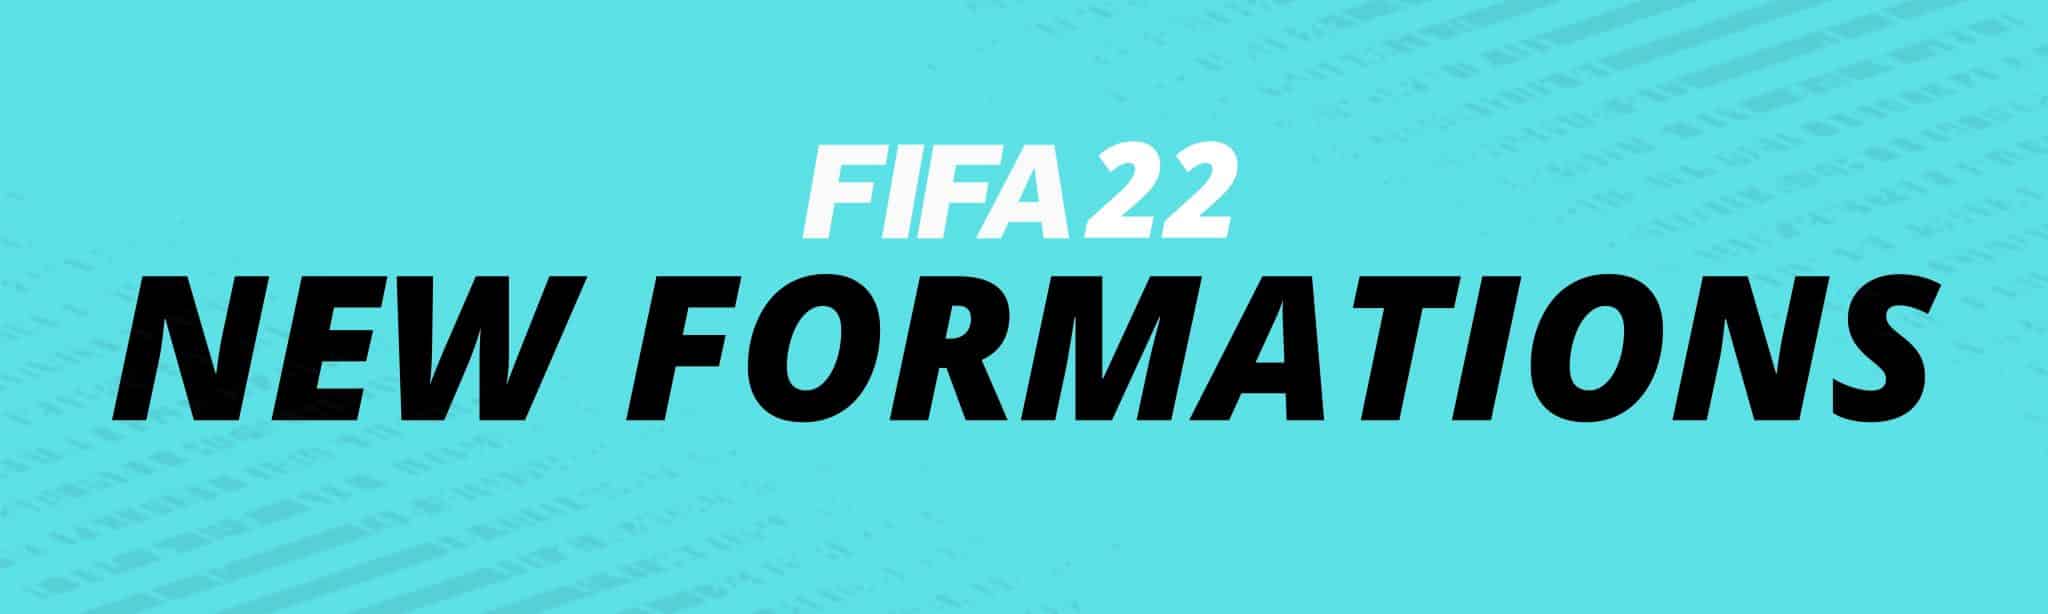 FIFA 22 FORMATIONS BANNER